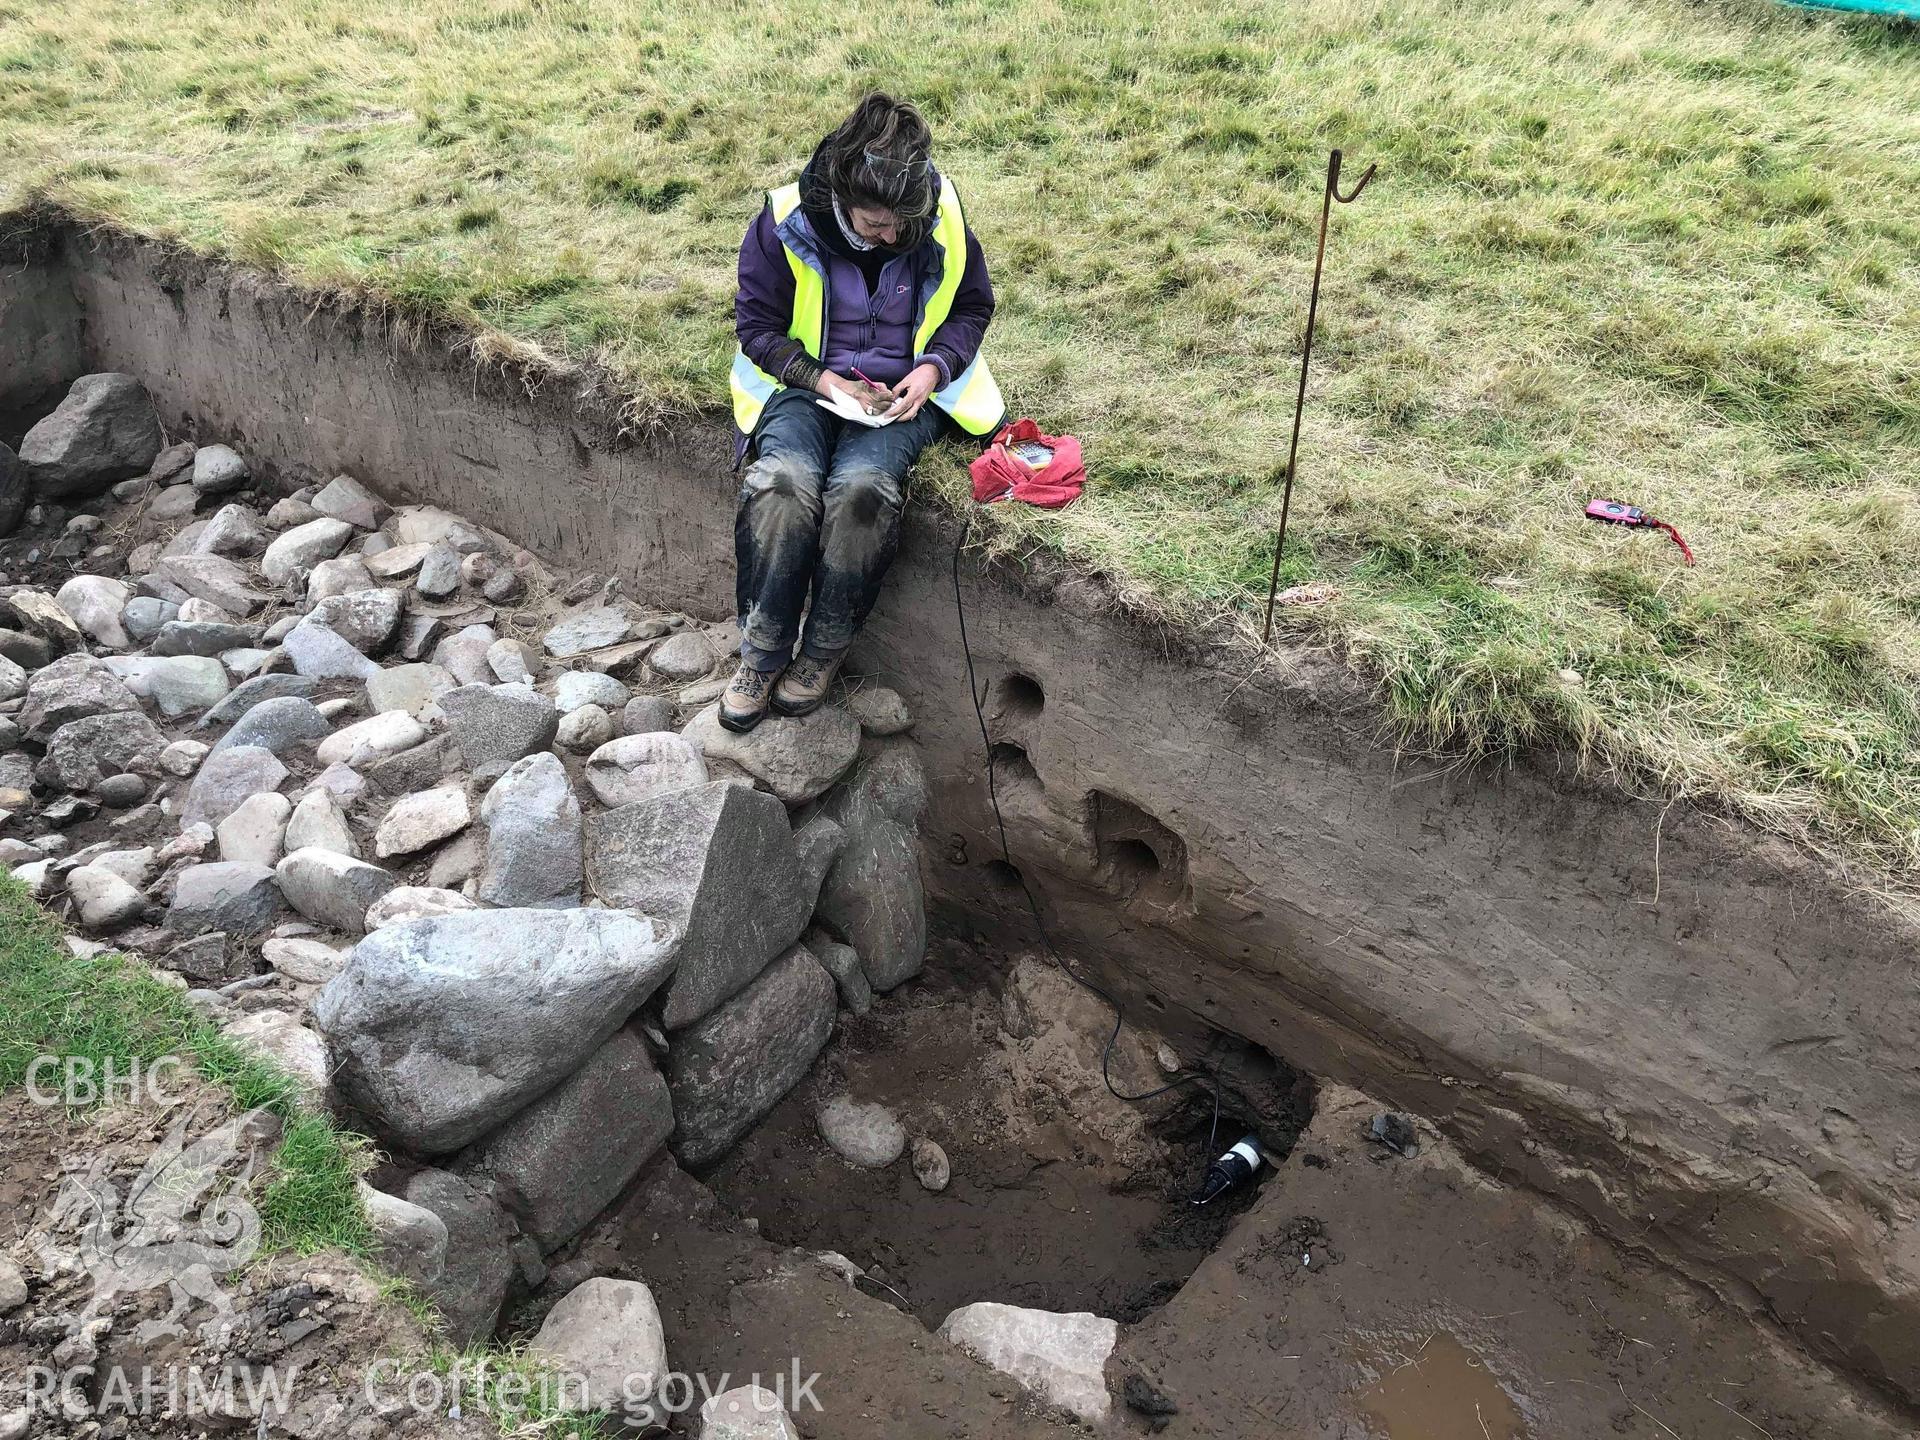 CHERISH team member taking samples in trench Taken by Toby Driver. Produced with EU funds through the Ireland Wales Co-operation Programme 2014-2023. All material made freely available through the Open Government Licence.